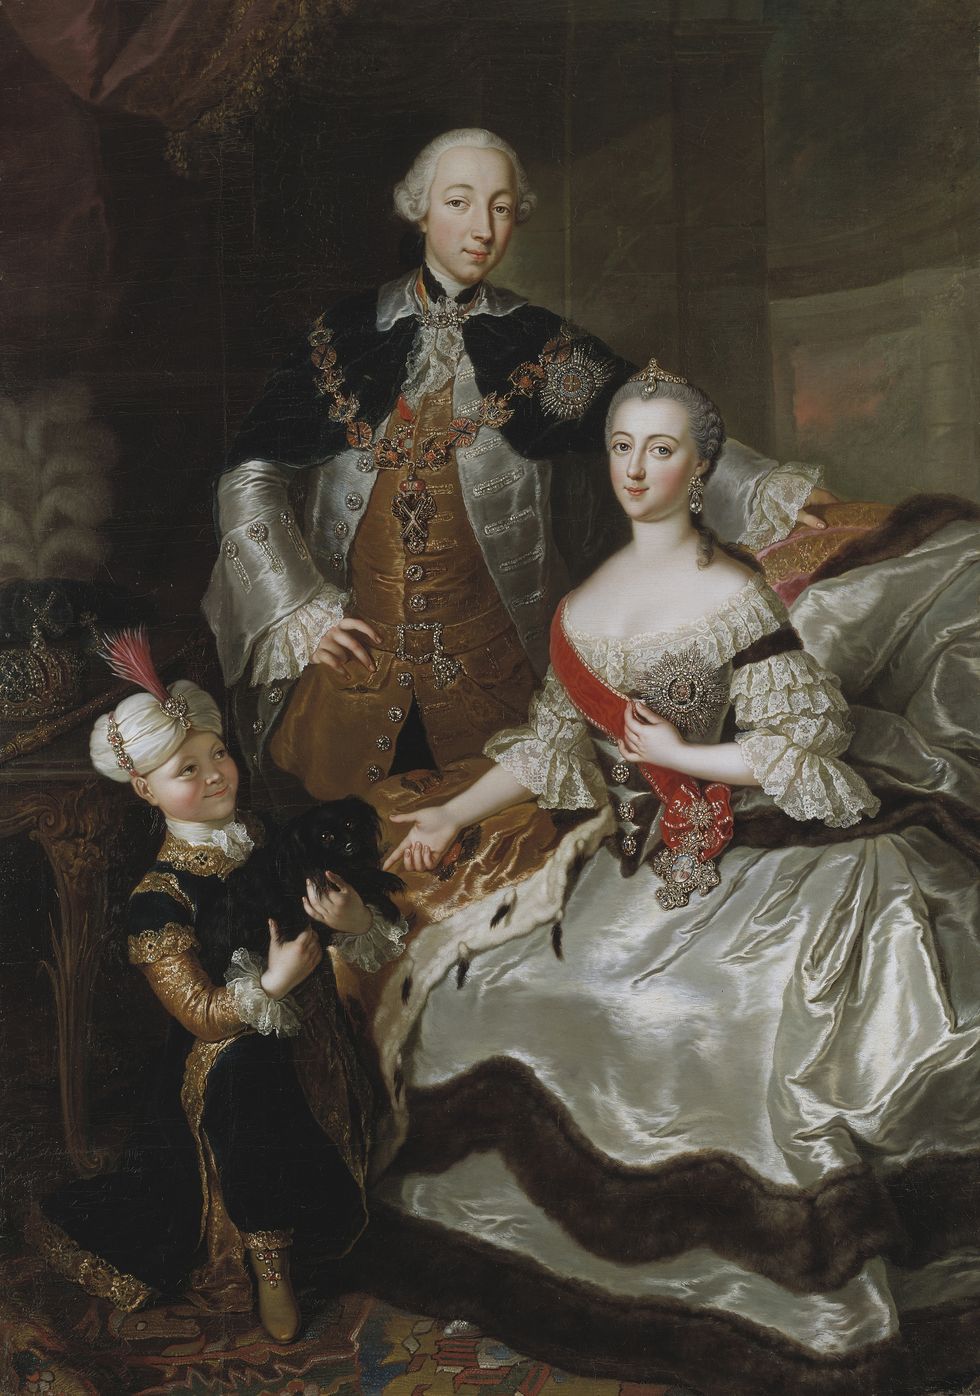 Peter III and Catherine the Great